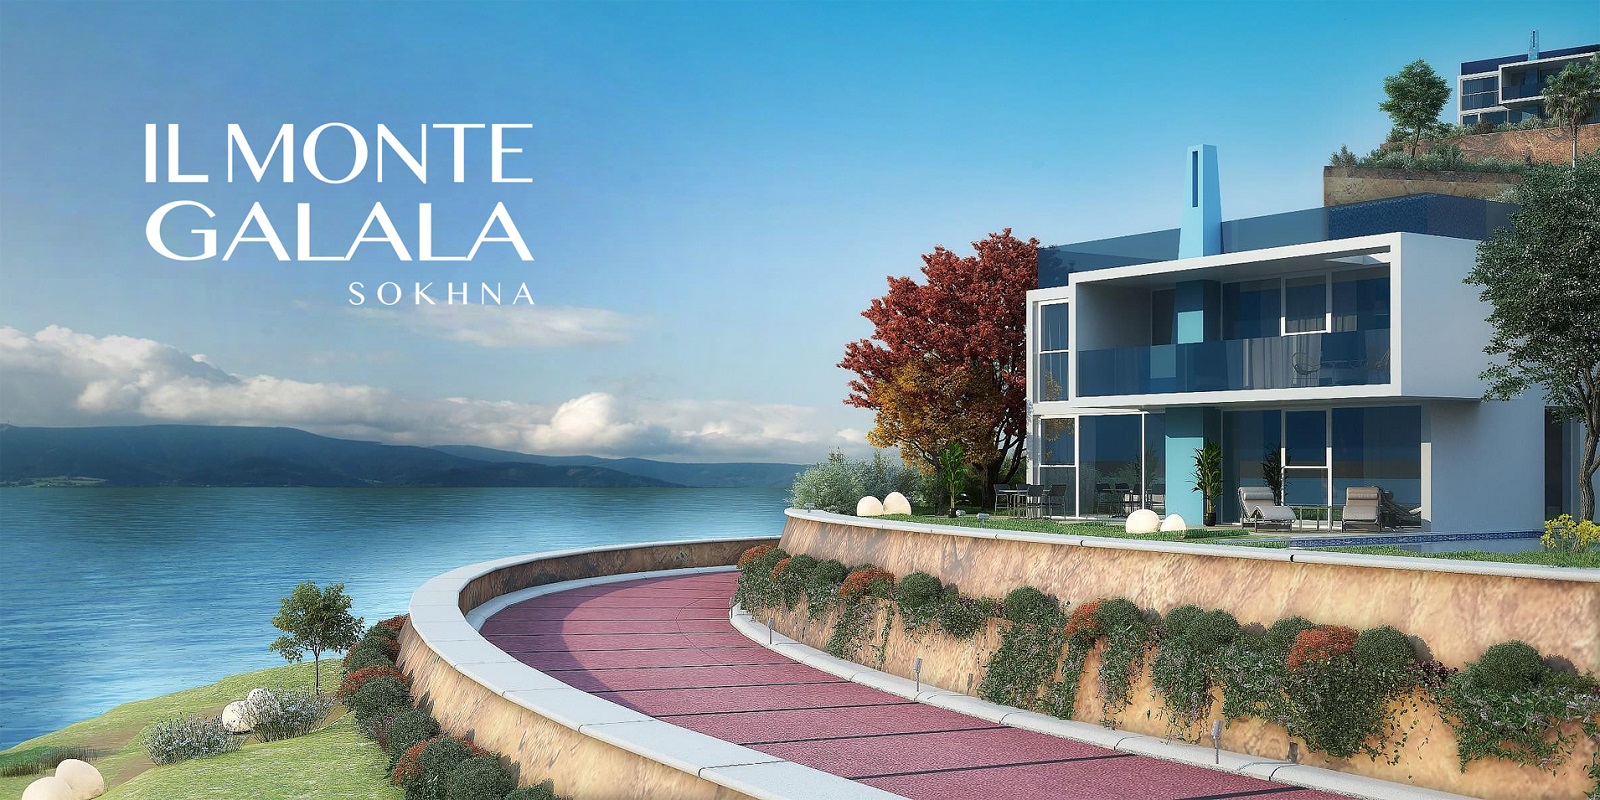 Villa in Il Monte Galala with facilities up to 10 years